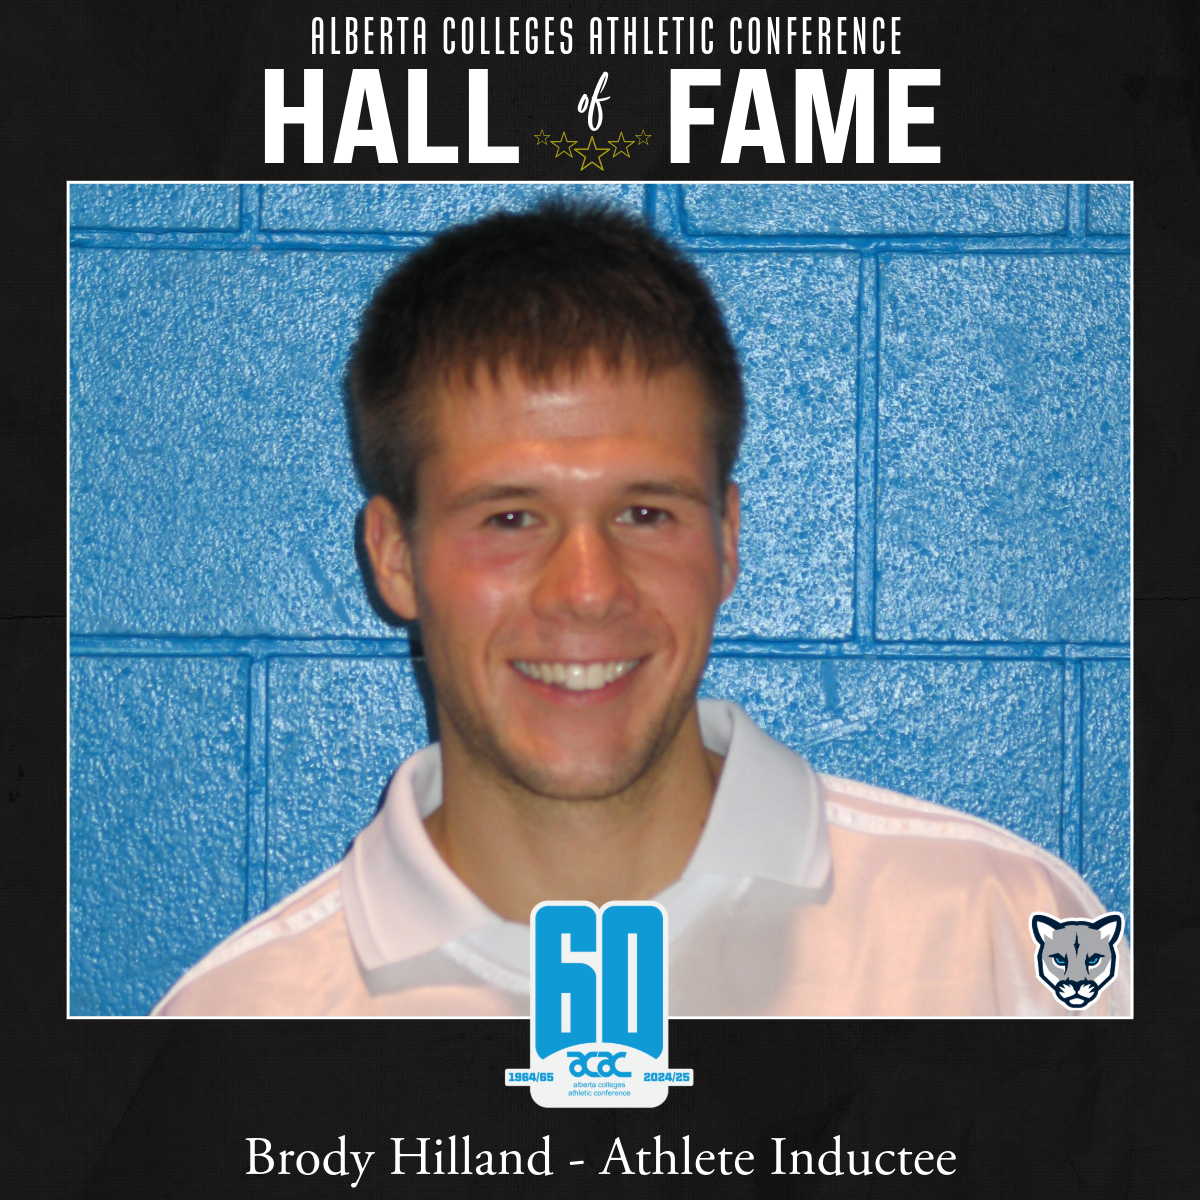 ACAC Hall of Fame Athlete Inductee: Brody Hilland